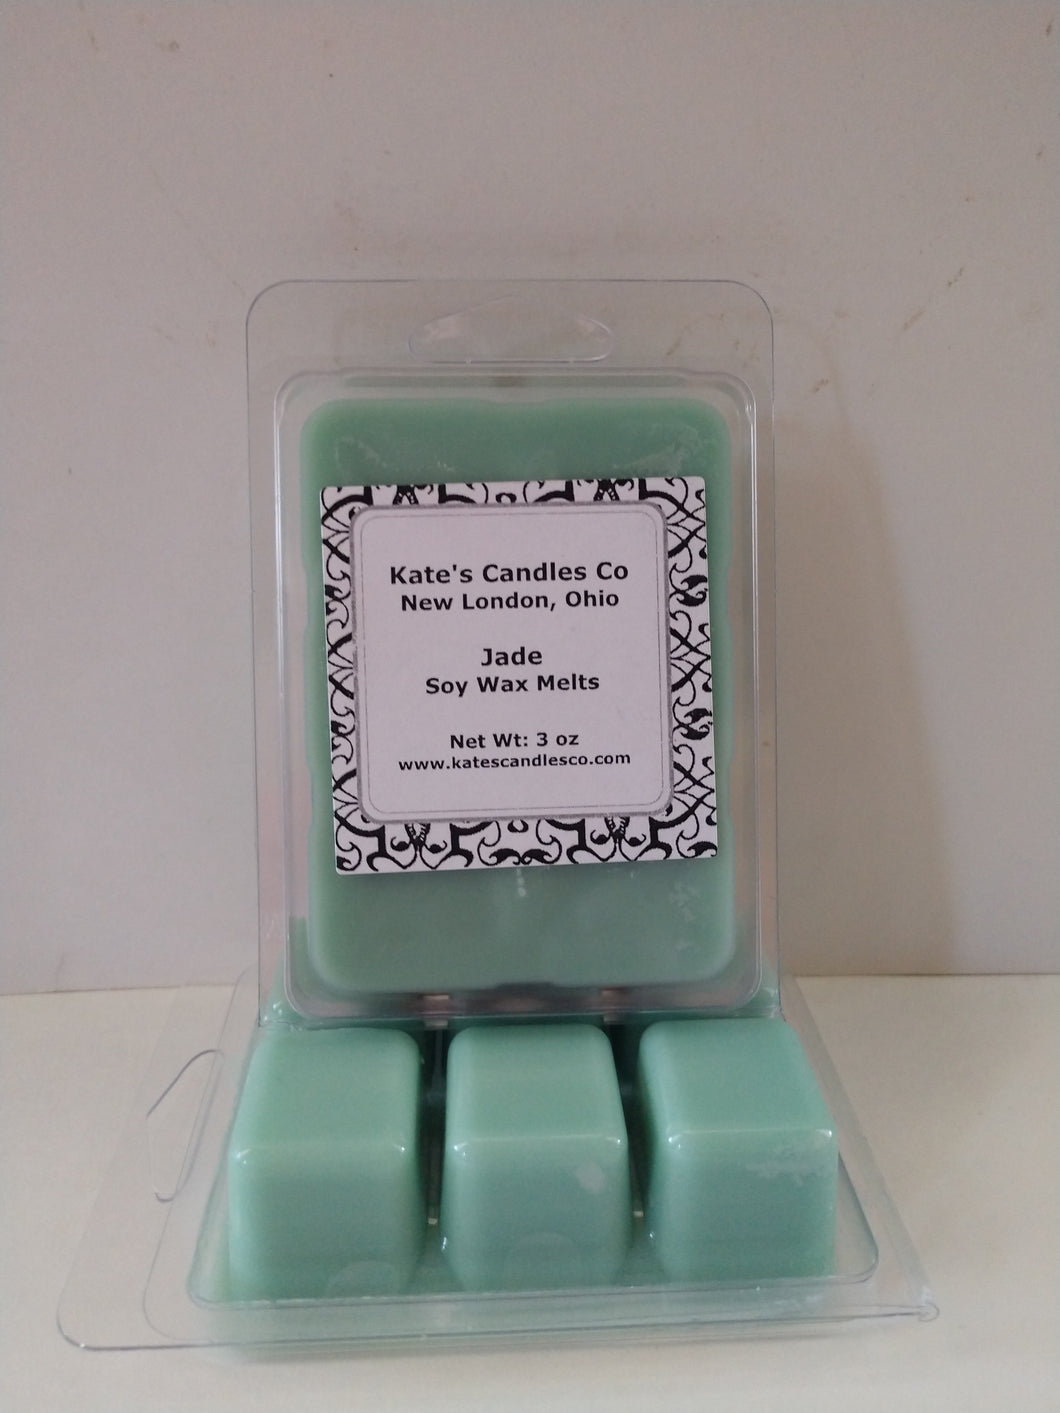 Jade Scented Wax Melts - Kate's Candles Co. Soy Candles